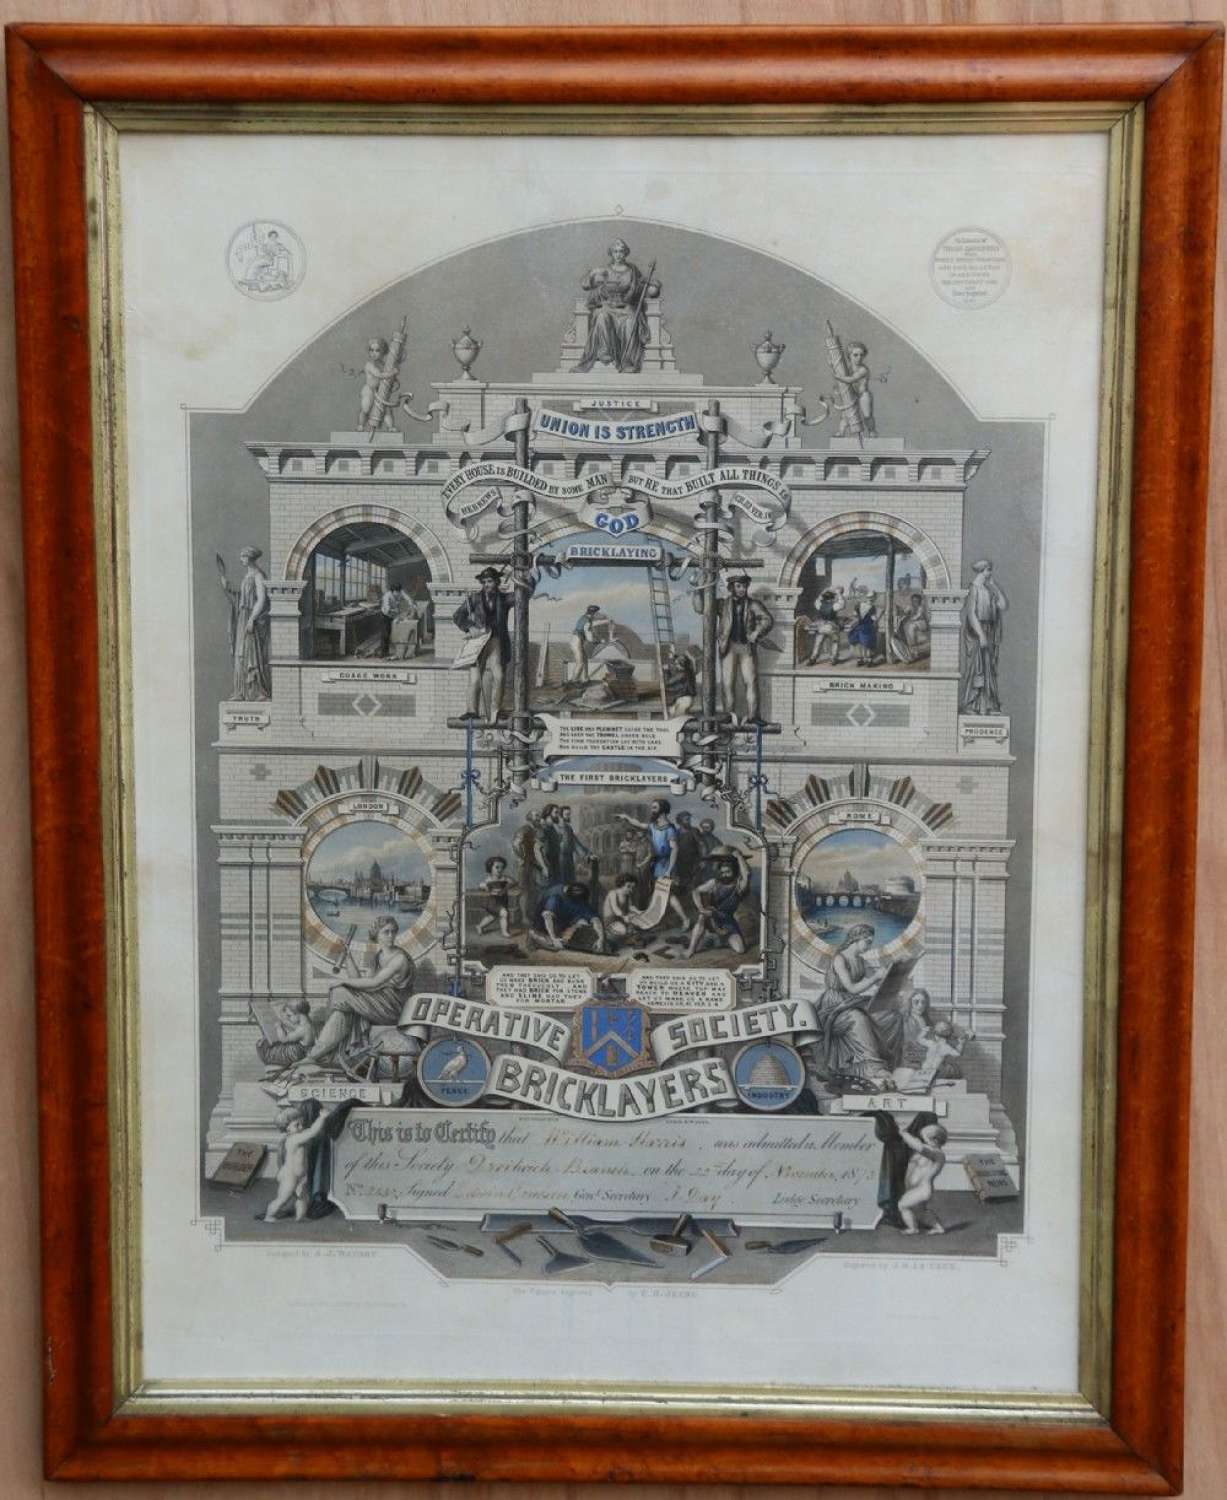 A Rare Victorian Original Framed Master Builders “ Society Of Bricklayers” Certificate